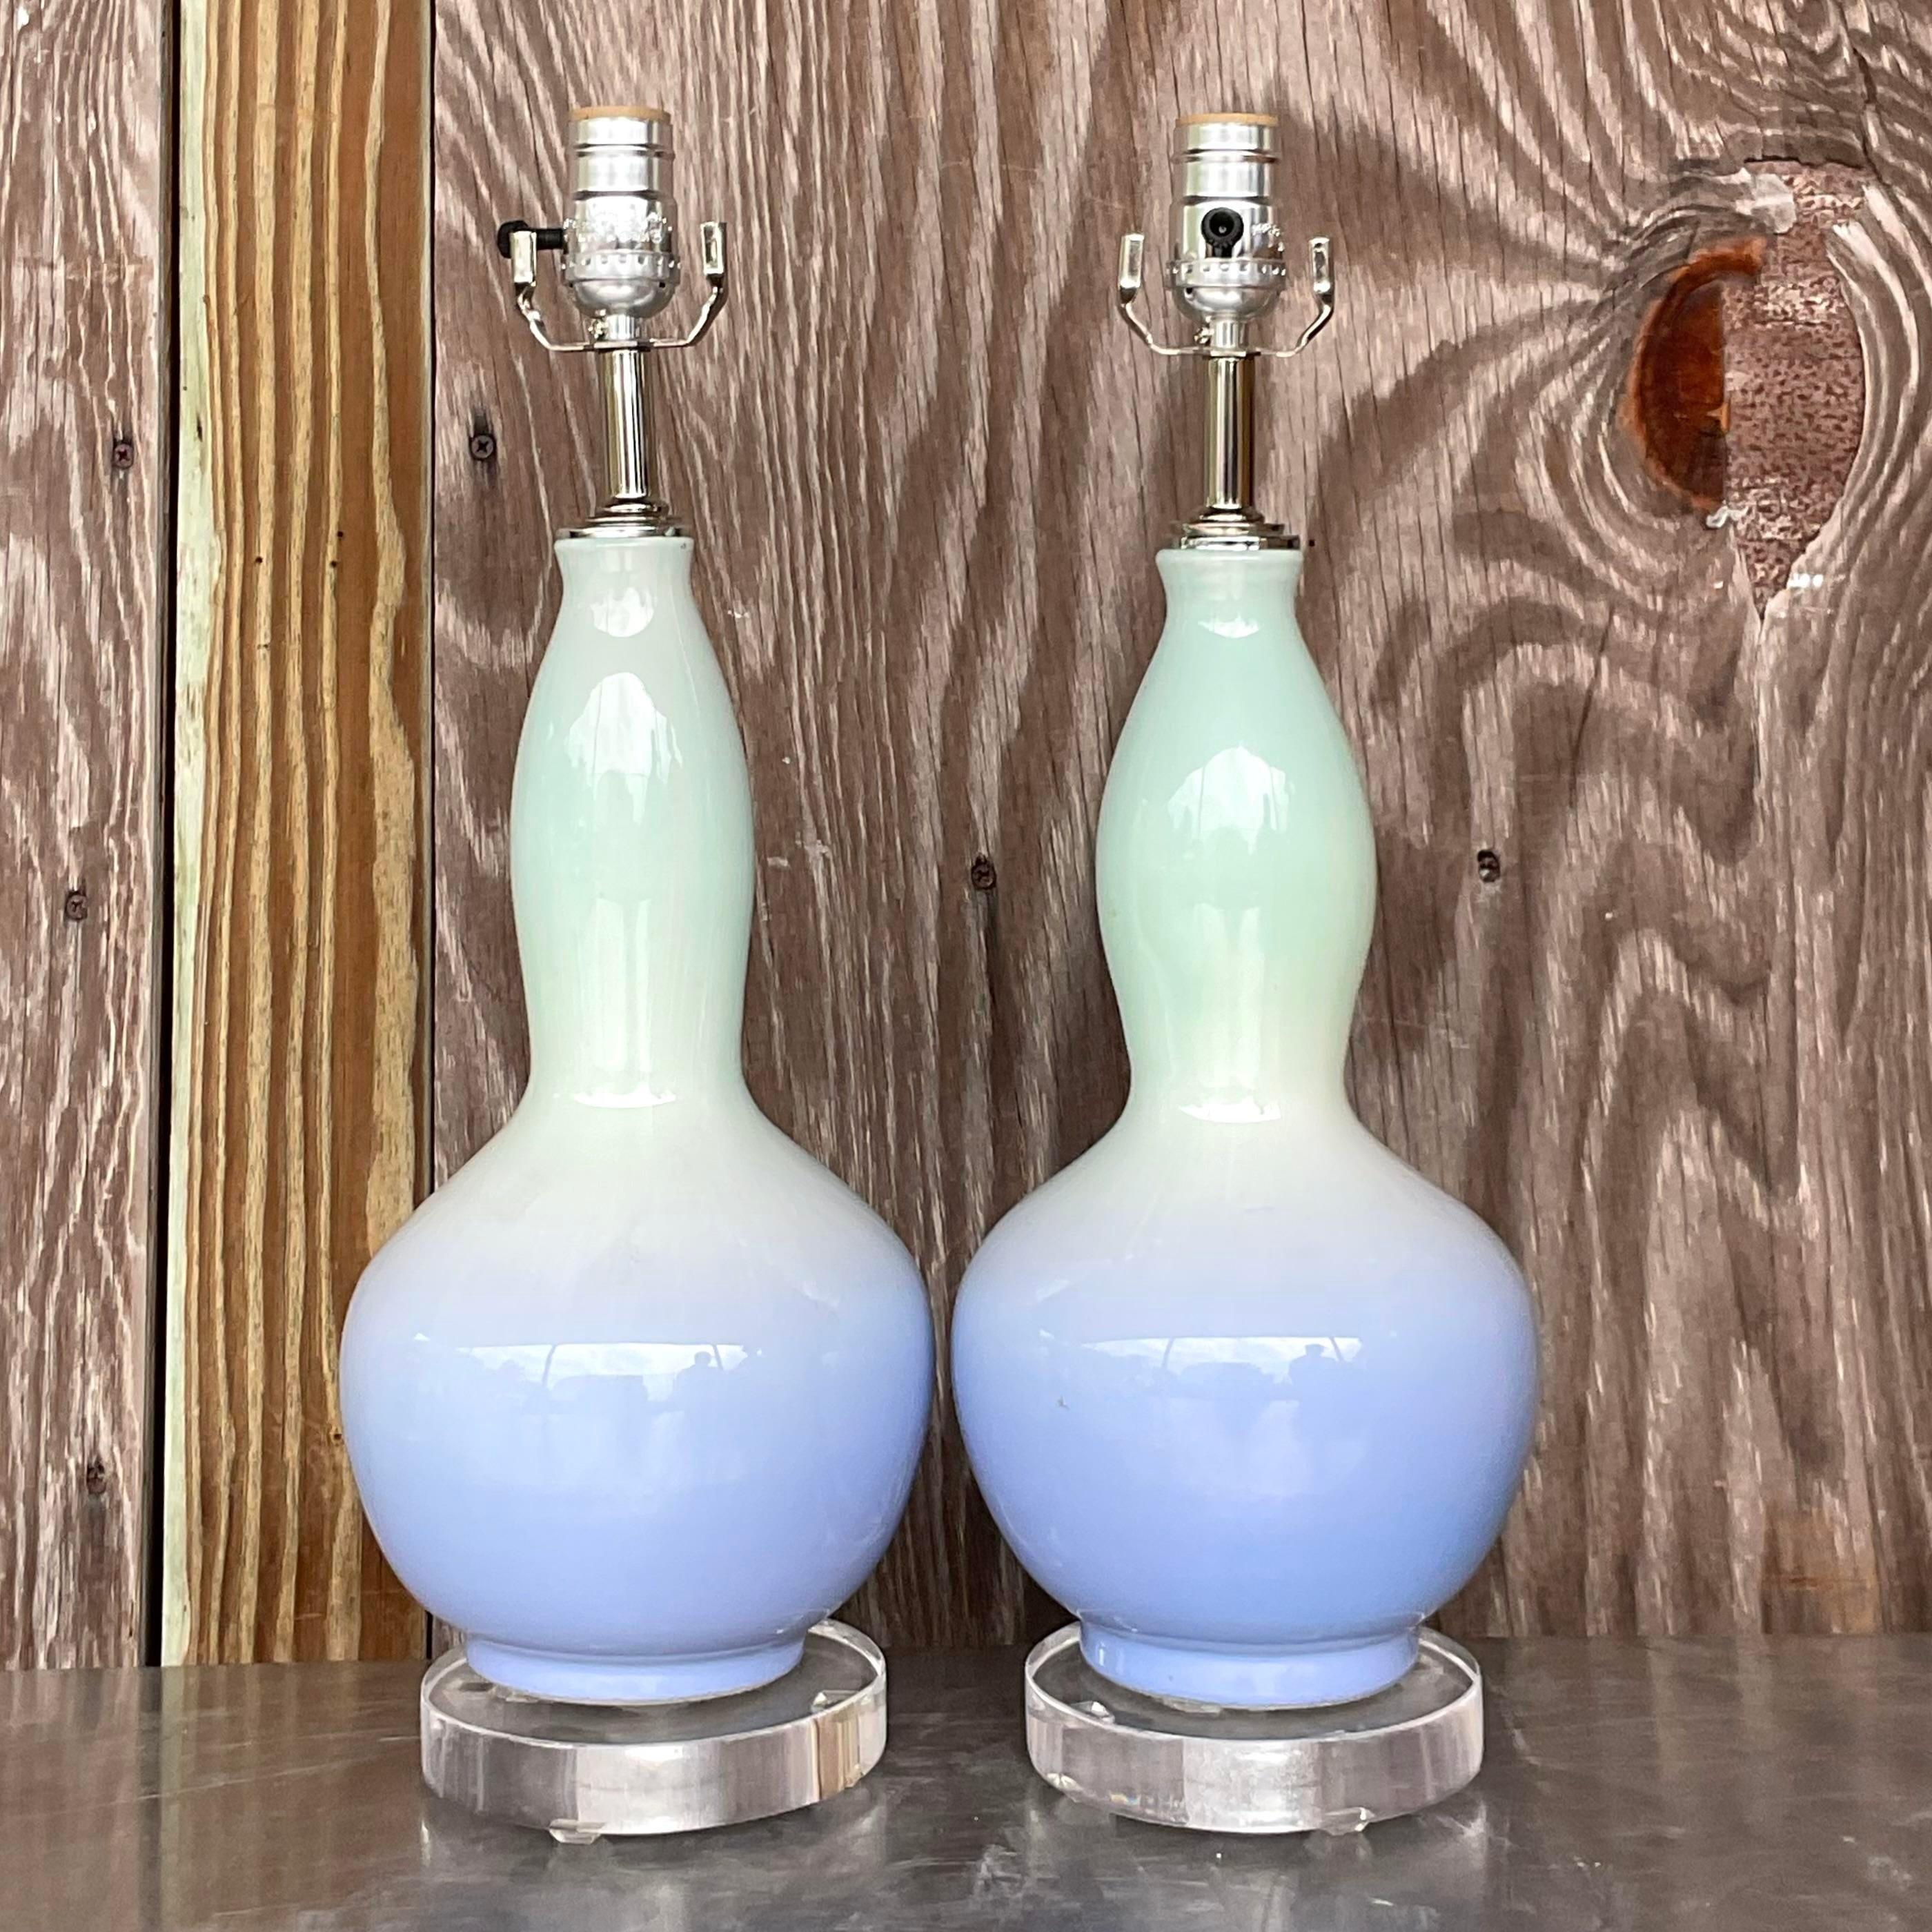 Regal Radiance: Vintage Regency Ombre Glass Lamps - A Pair. Illuminate your space with American elegance and timeless sophistication, featuring exquisite ombre glass design that adds a touch of regal charm to any room.